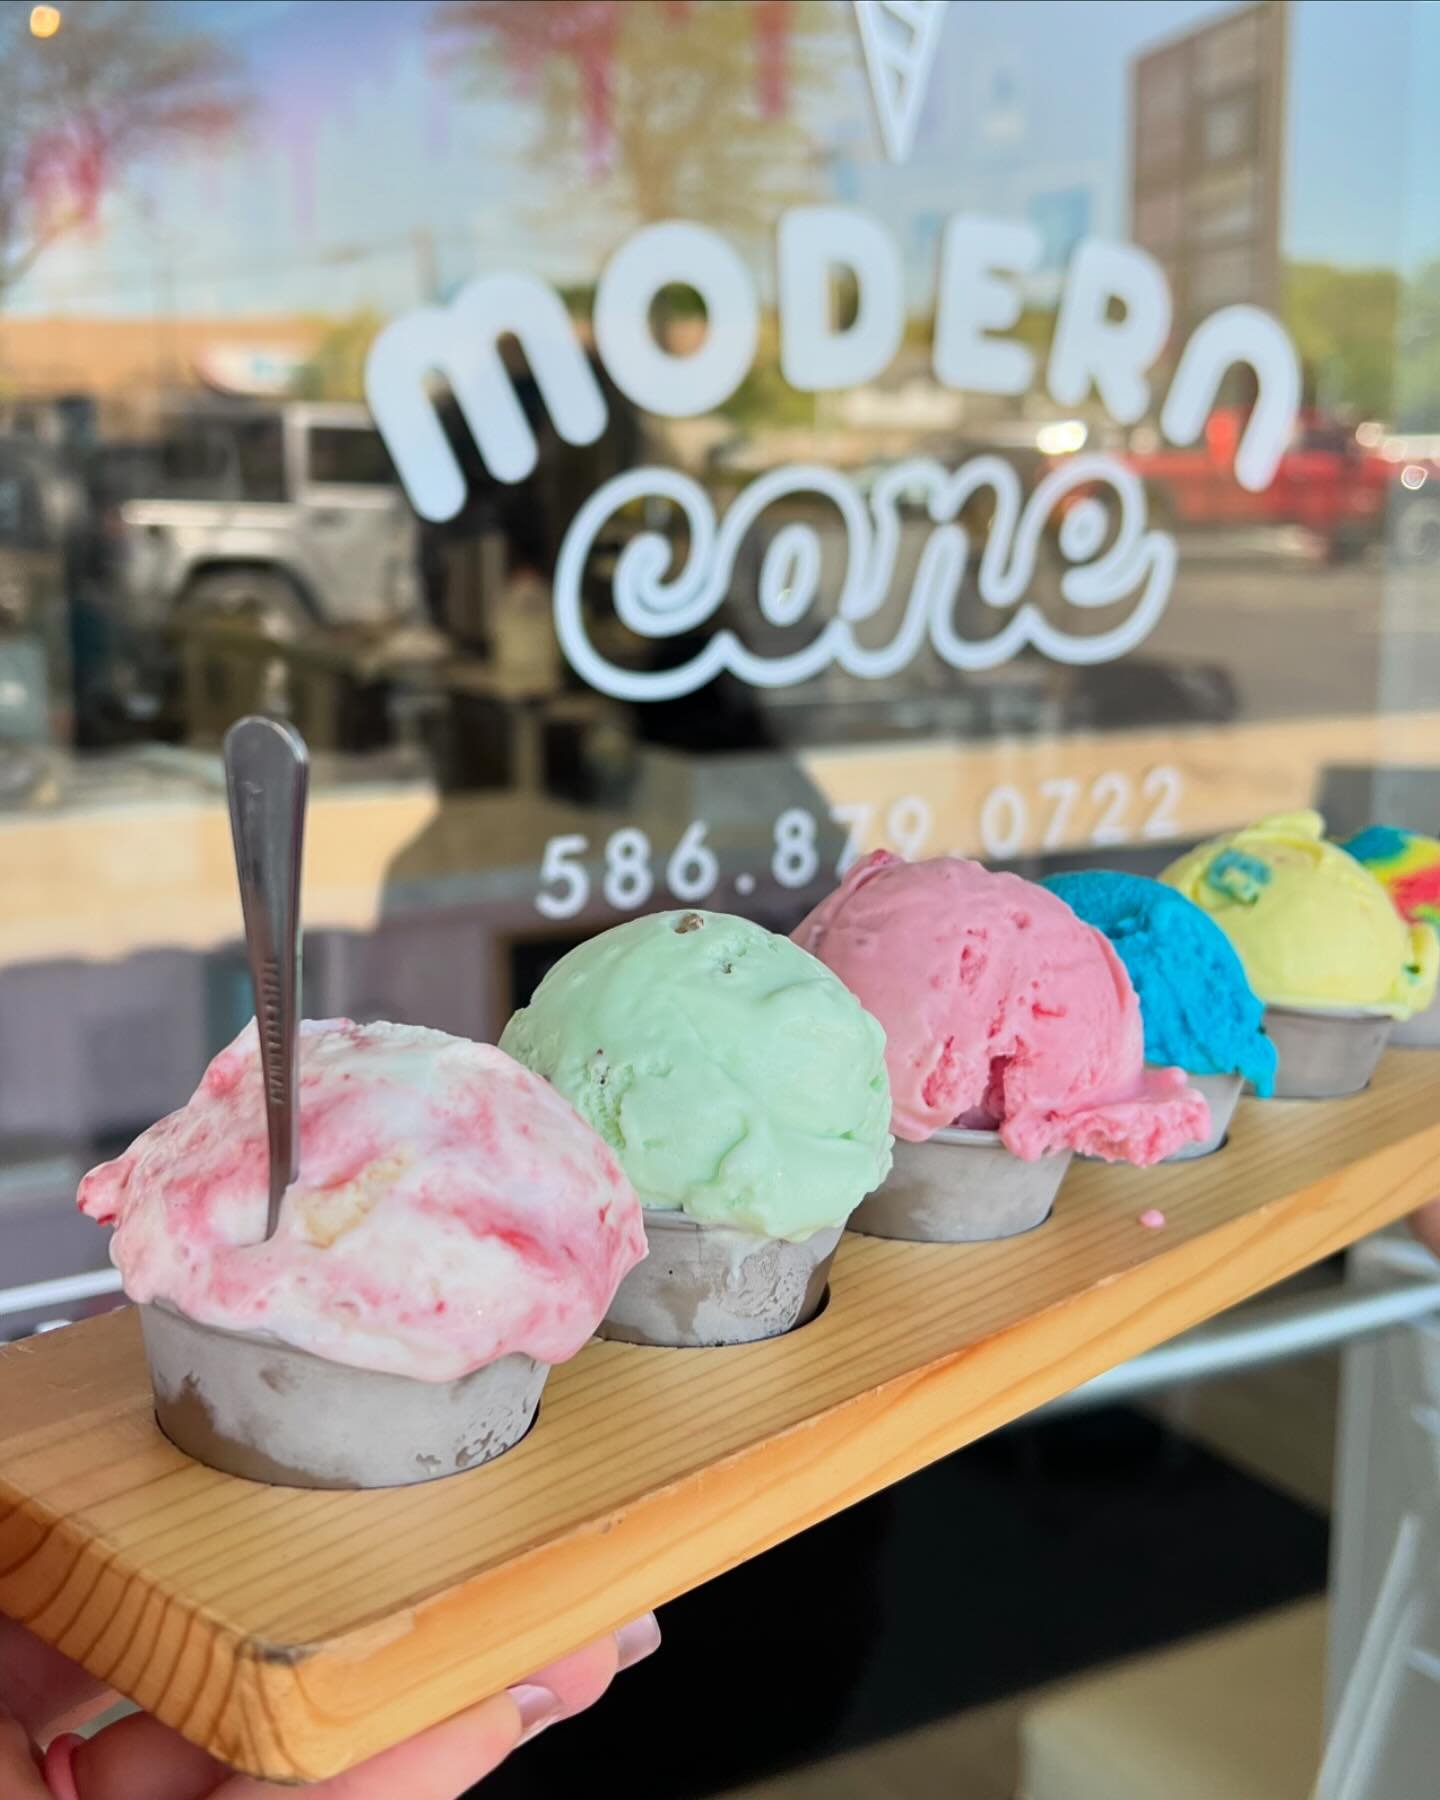 We aren&rsquo;t making you choose! 
Come grab a flight &amp; try 6 flavors 🍨 

📍 @moderncone 

#moderncone #metrodetroitfoodie #detroitfoodie